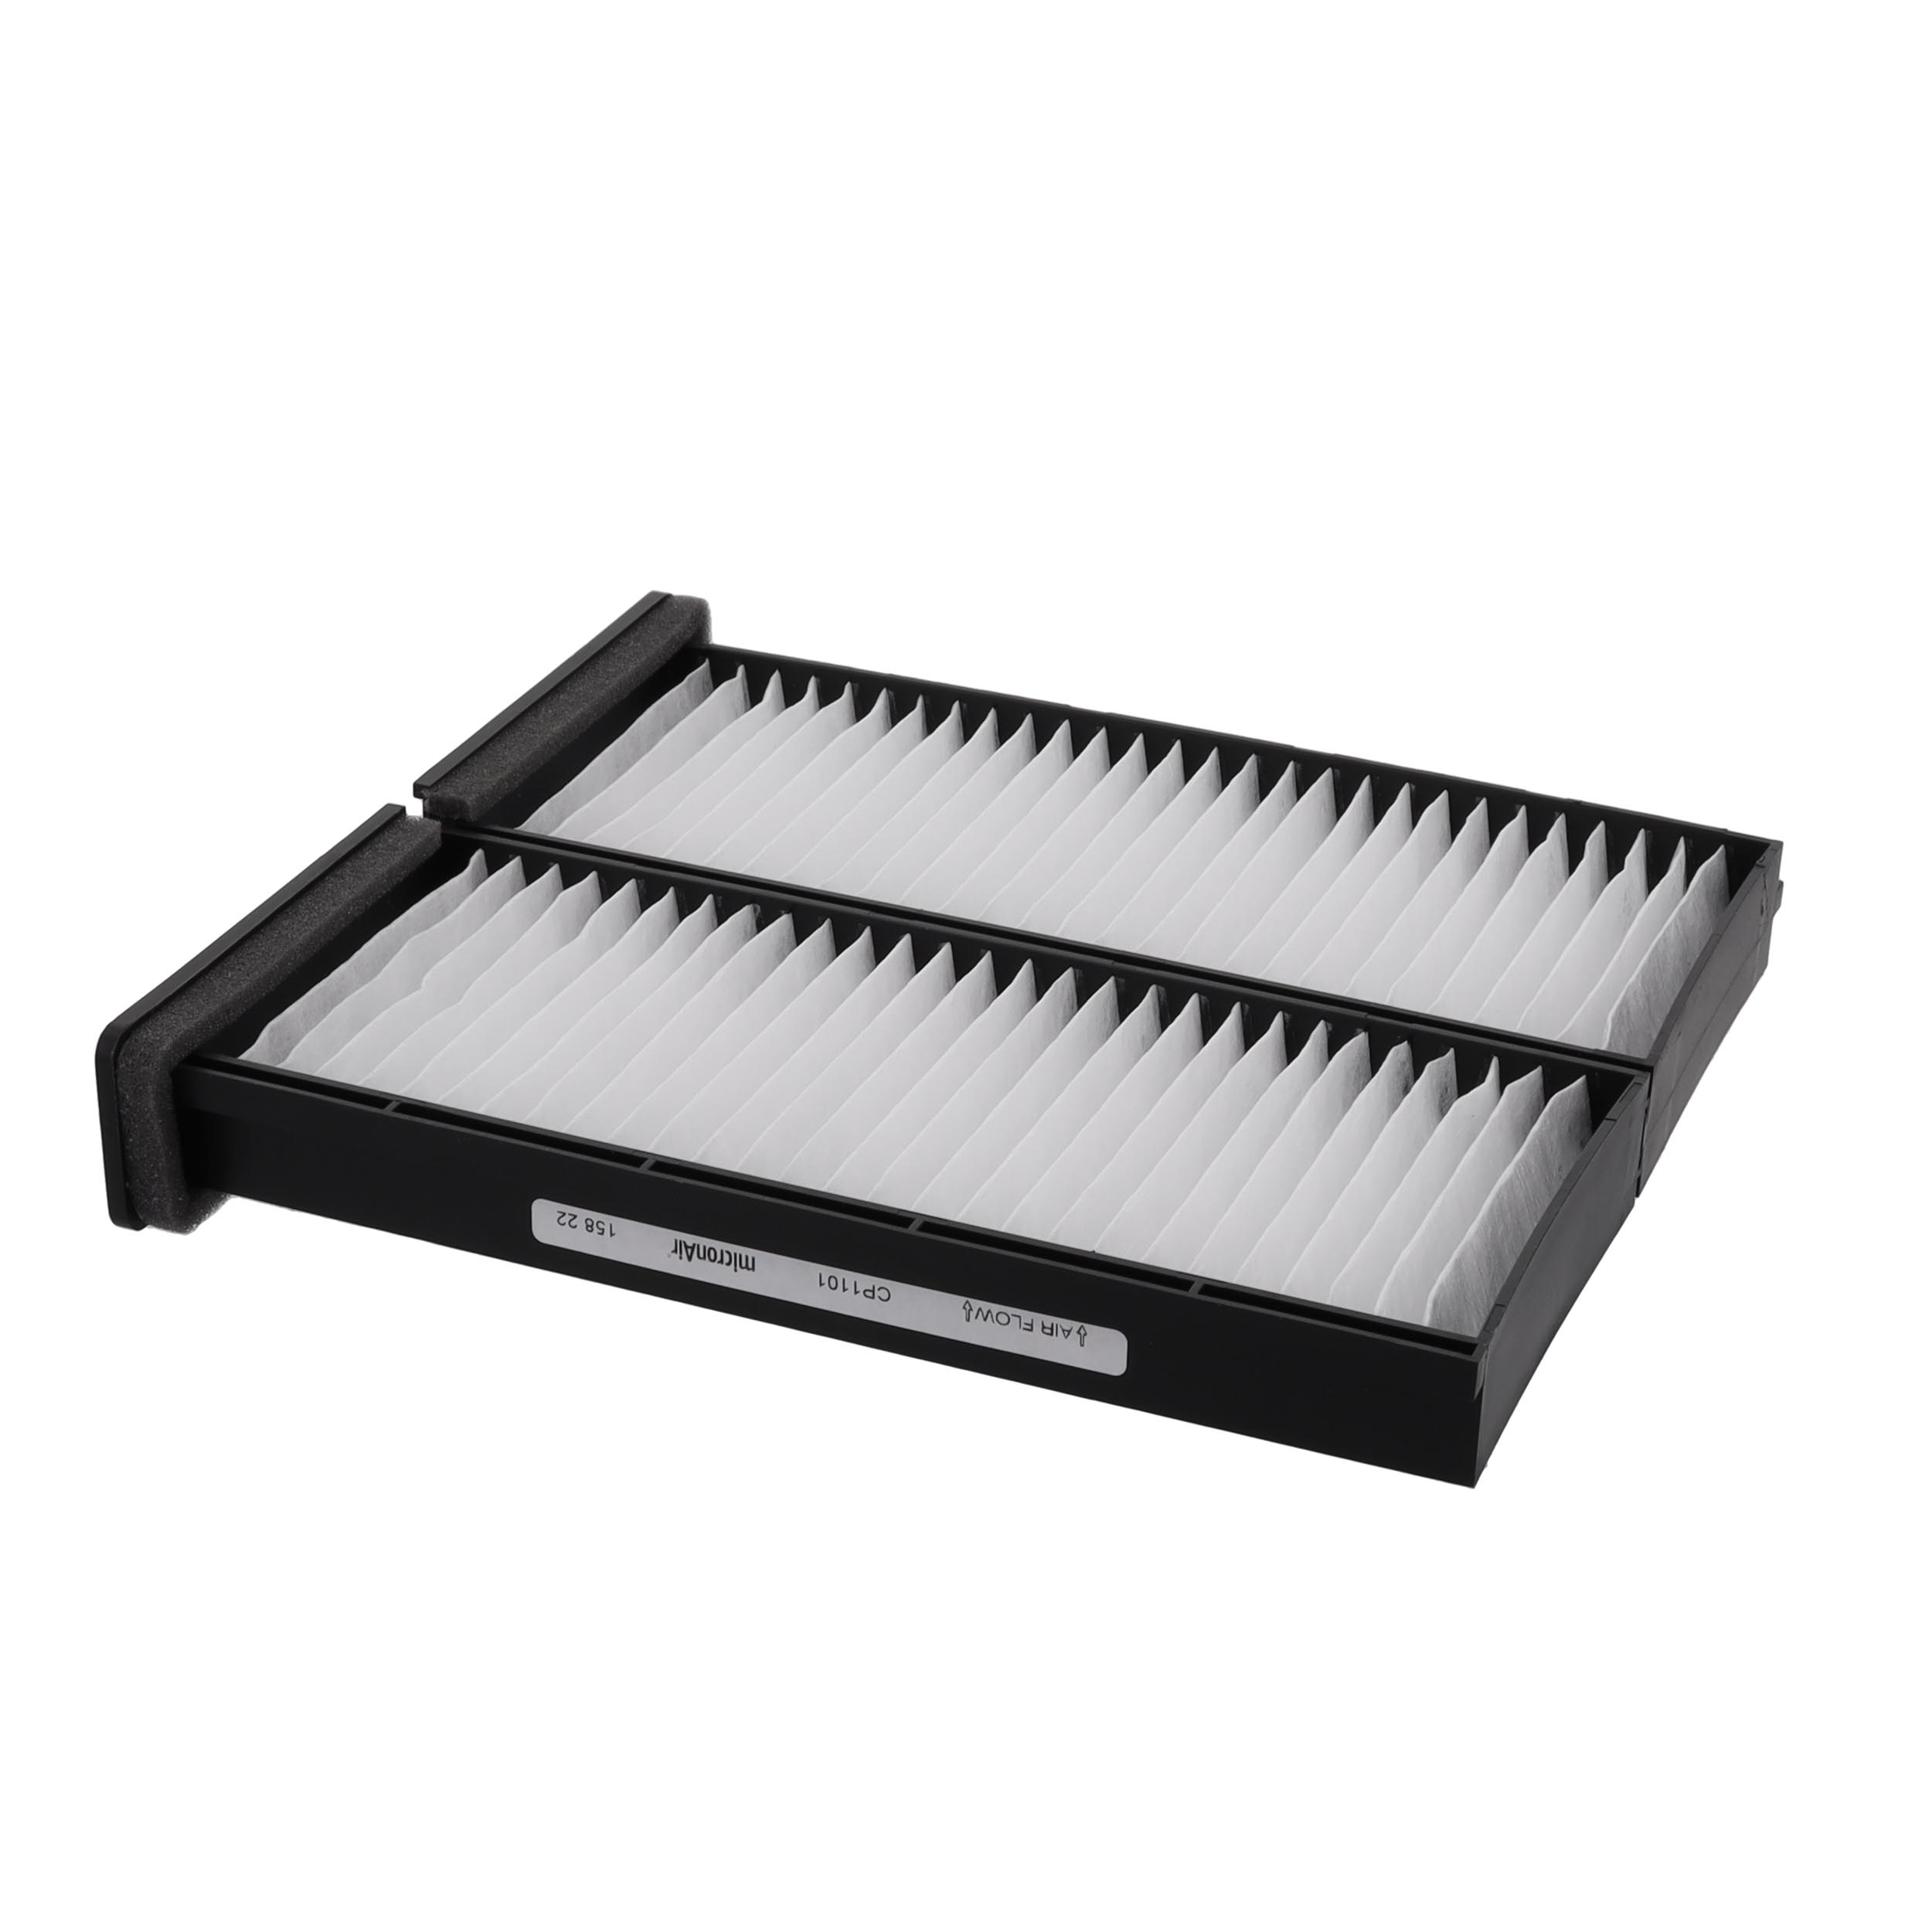 CORTECO Particulate Filter, 234 mm x 208 mm x 37 mm Width: 208mm, Height: 37mm, Length: 234mm Cabin filter 21652867 buy